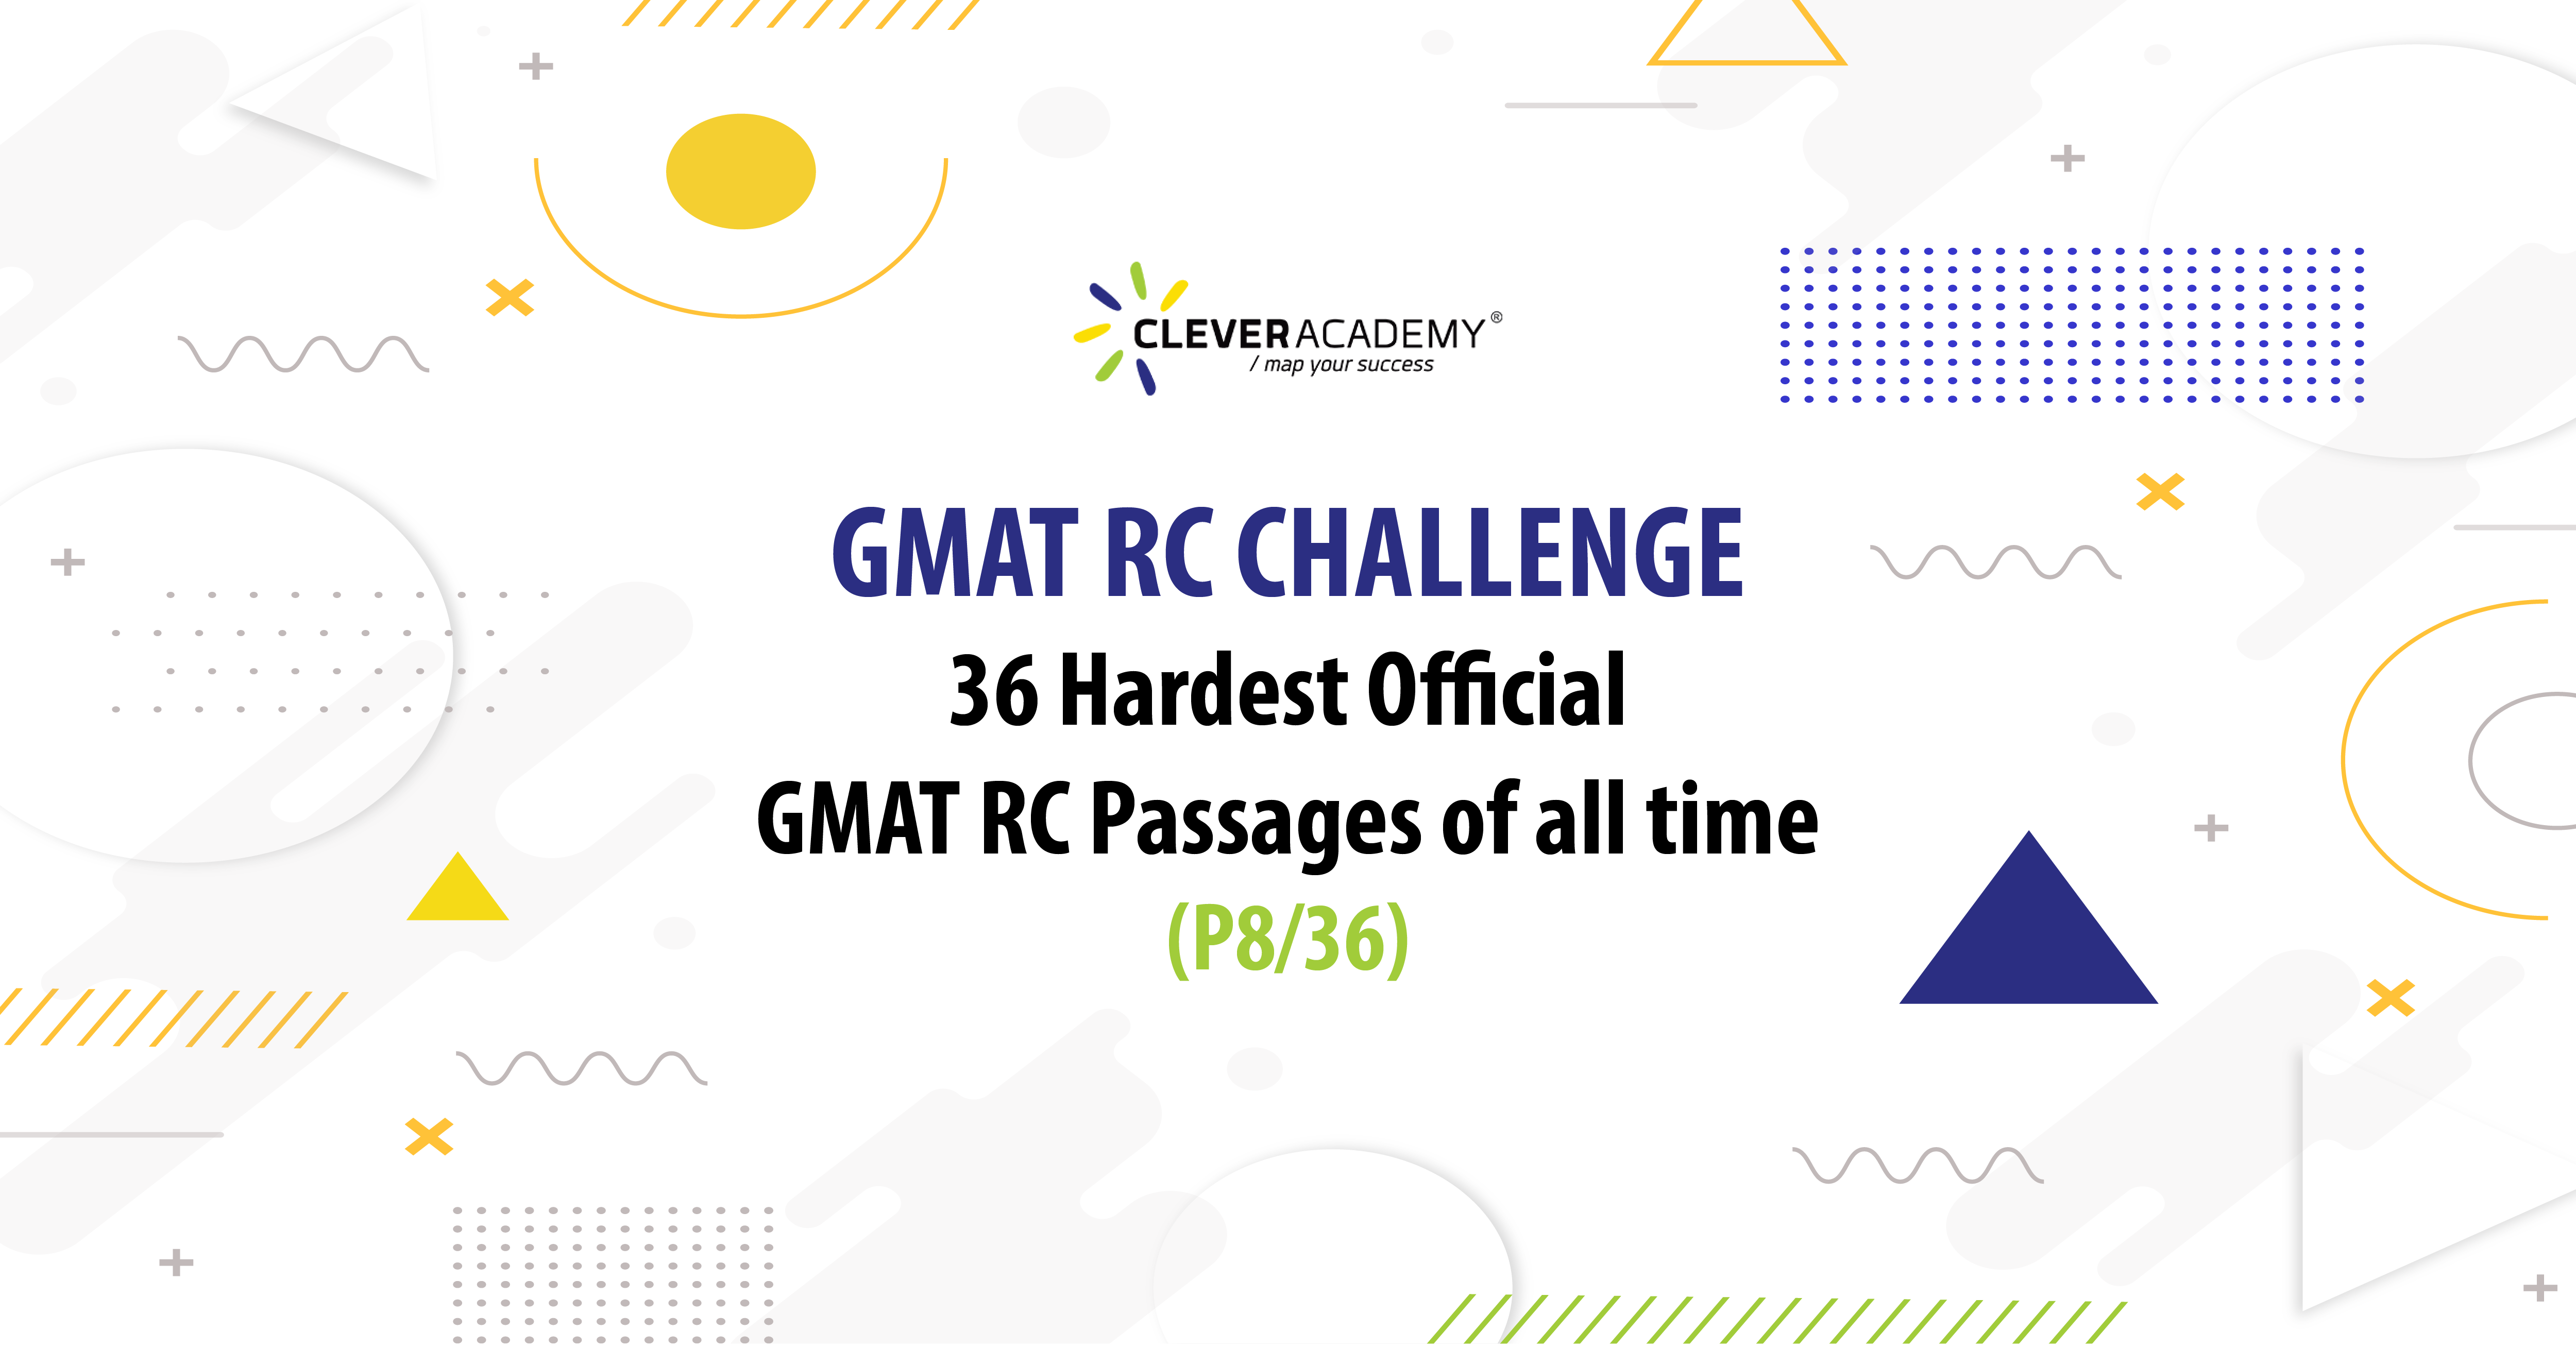 GMAT RC CHALLENGE – 36 Hardest Official GMAT RC Passages of all time (P8/36)